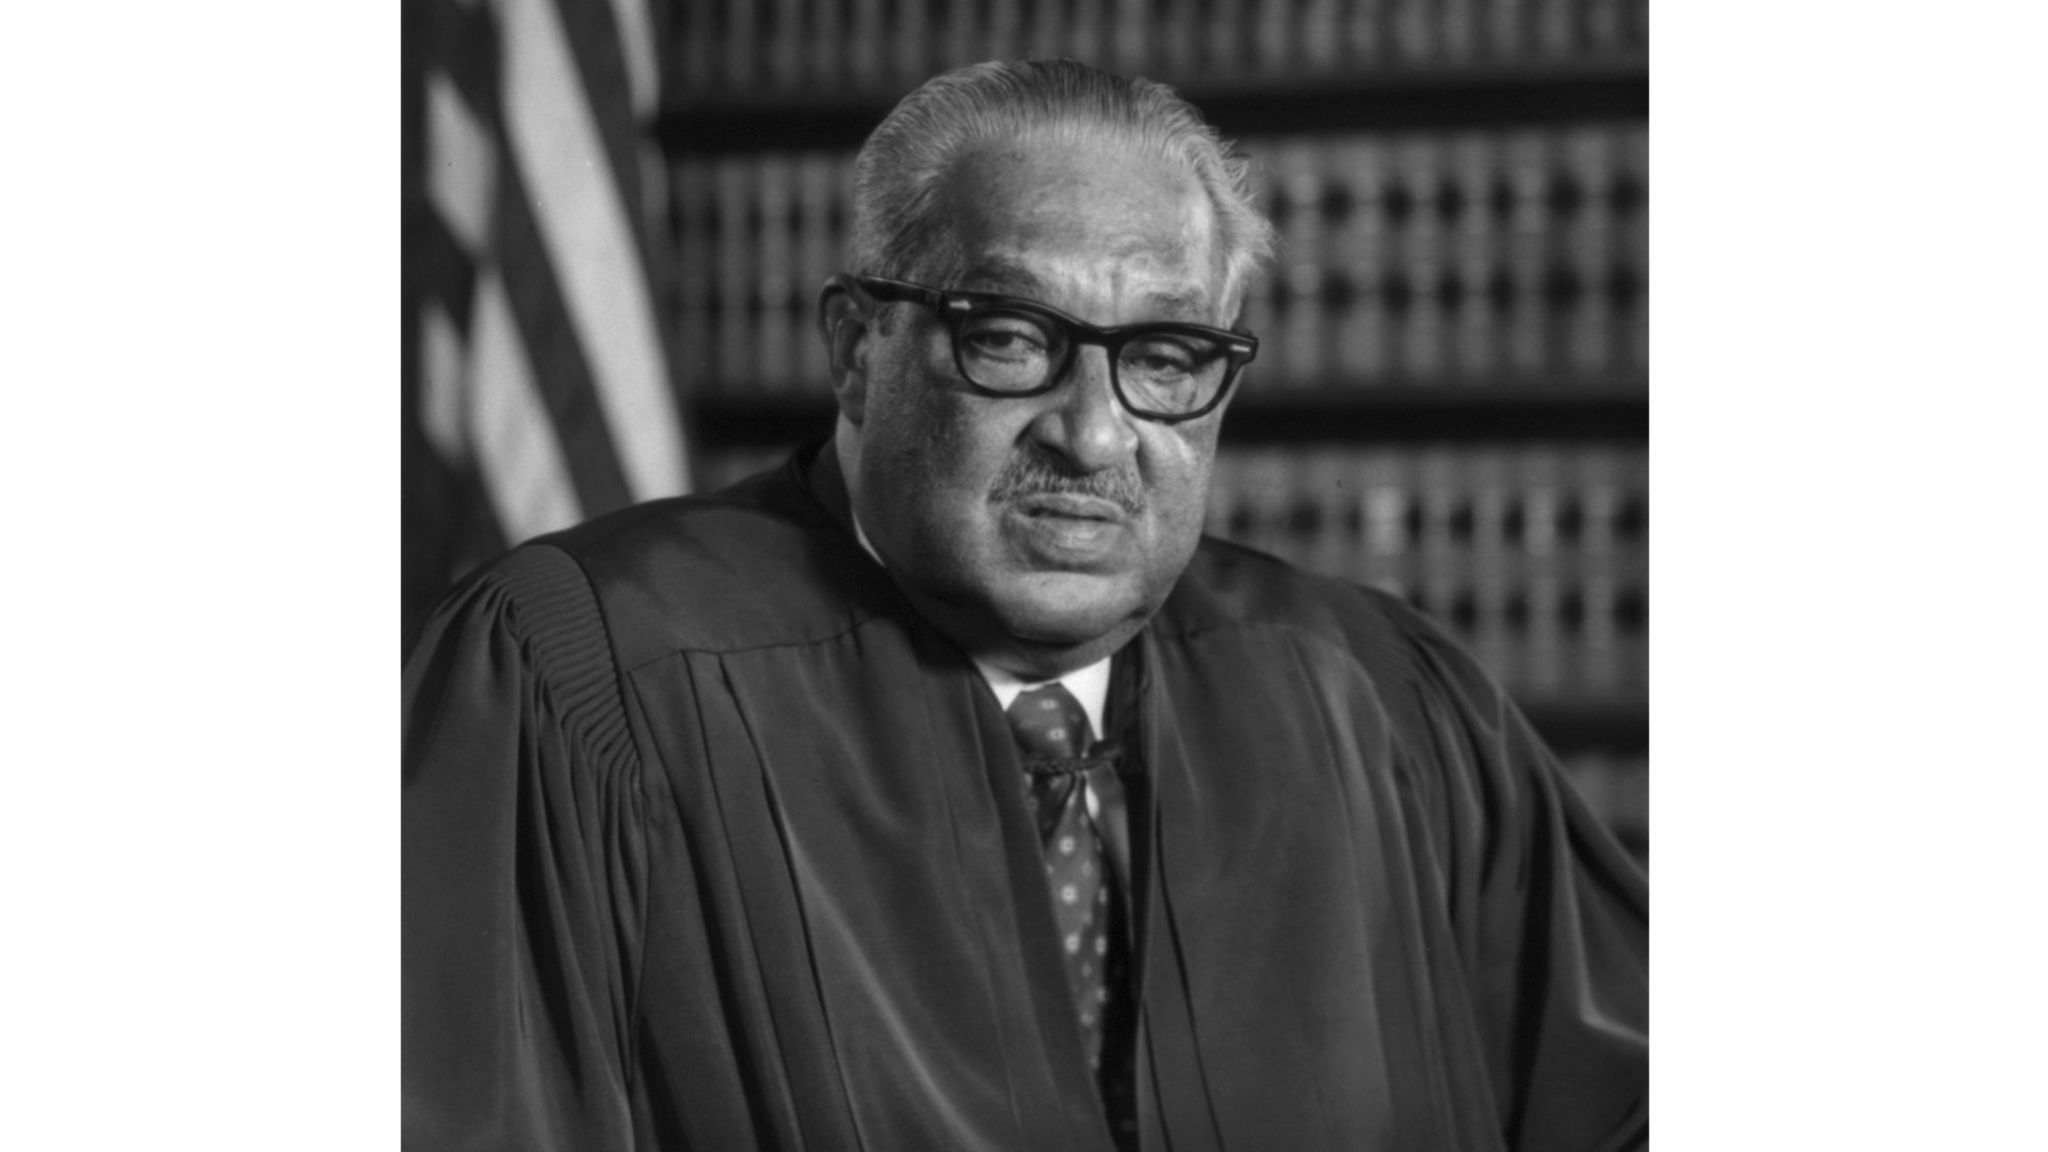 Hon. Thurgood Marshall Historical Society of the New York Courts